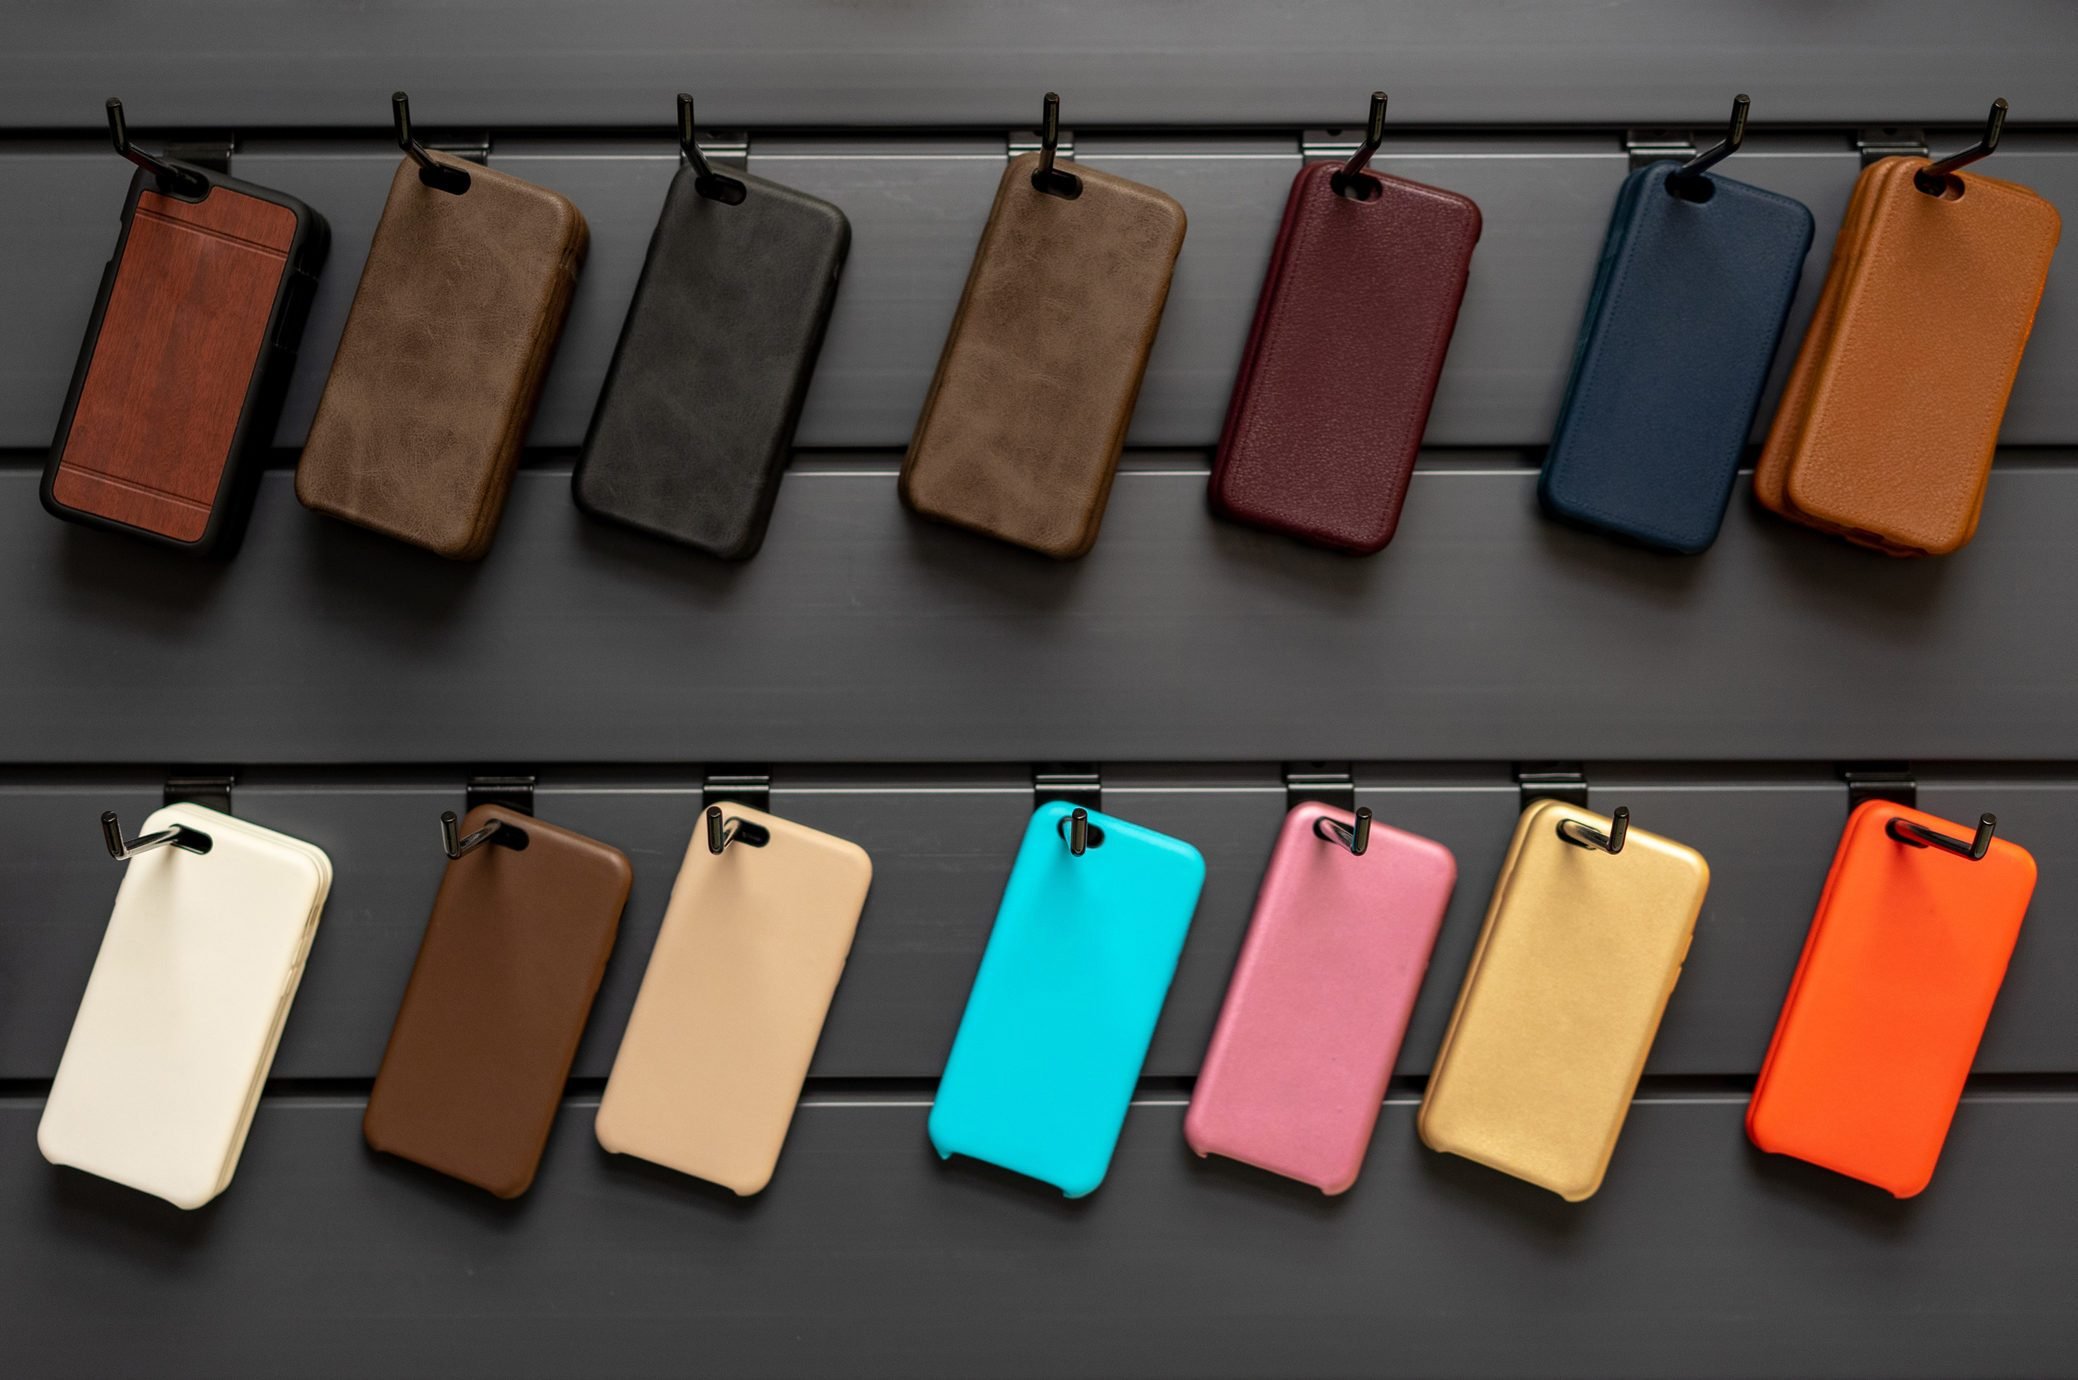 Colorful phone cases